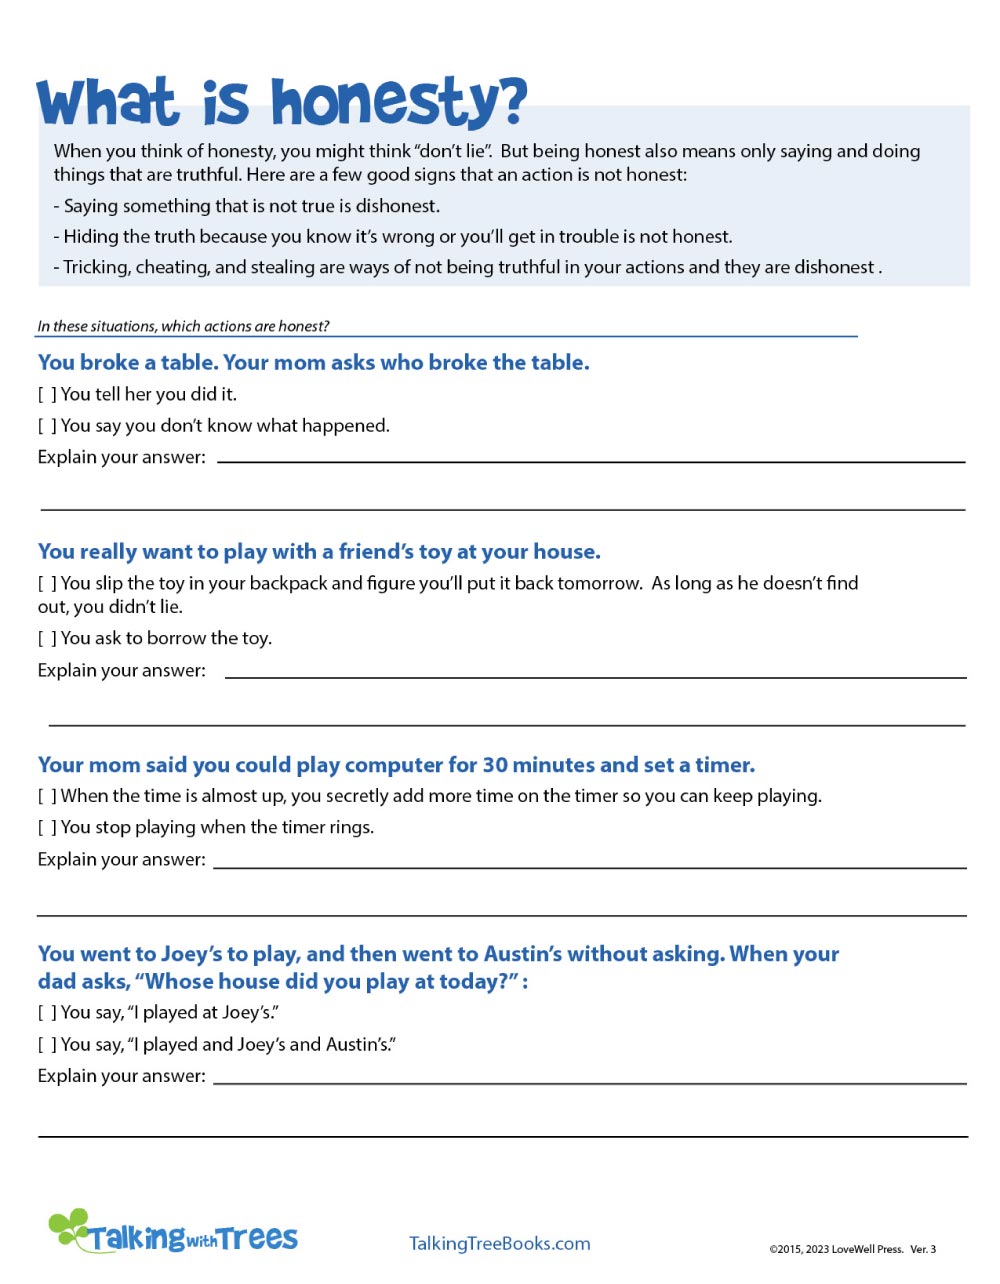 What is honesty worksheet for elementary students